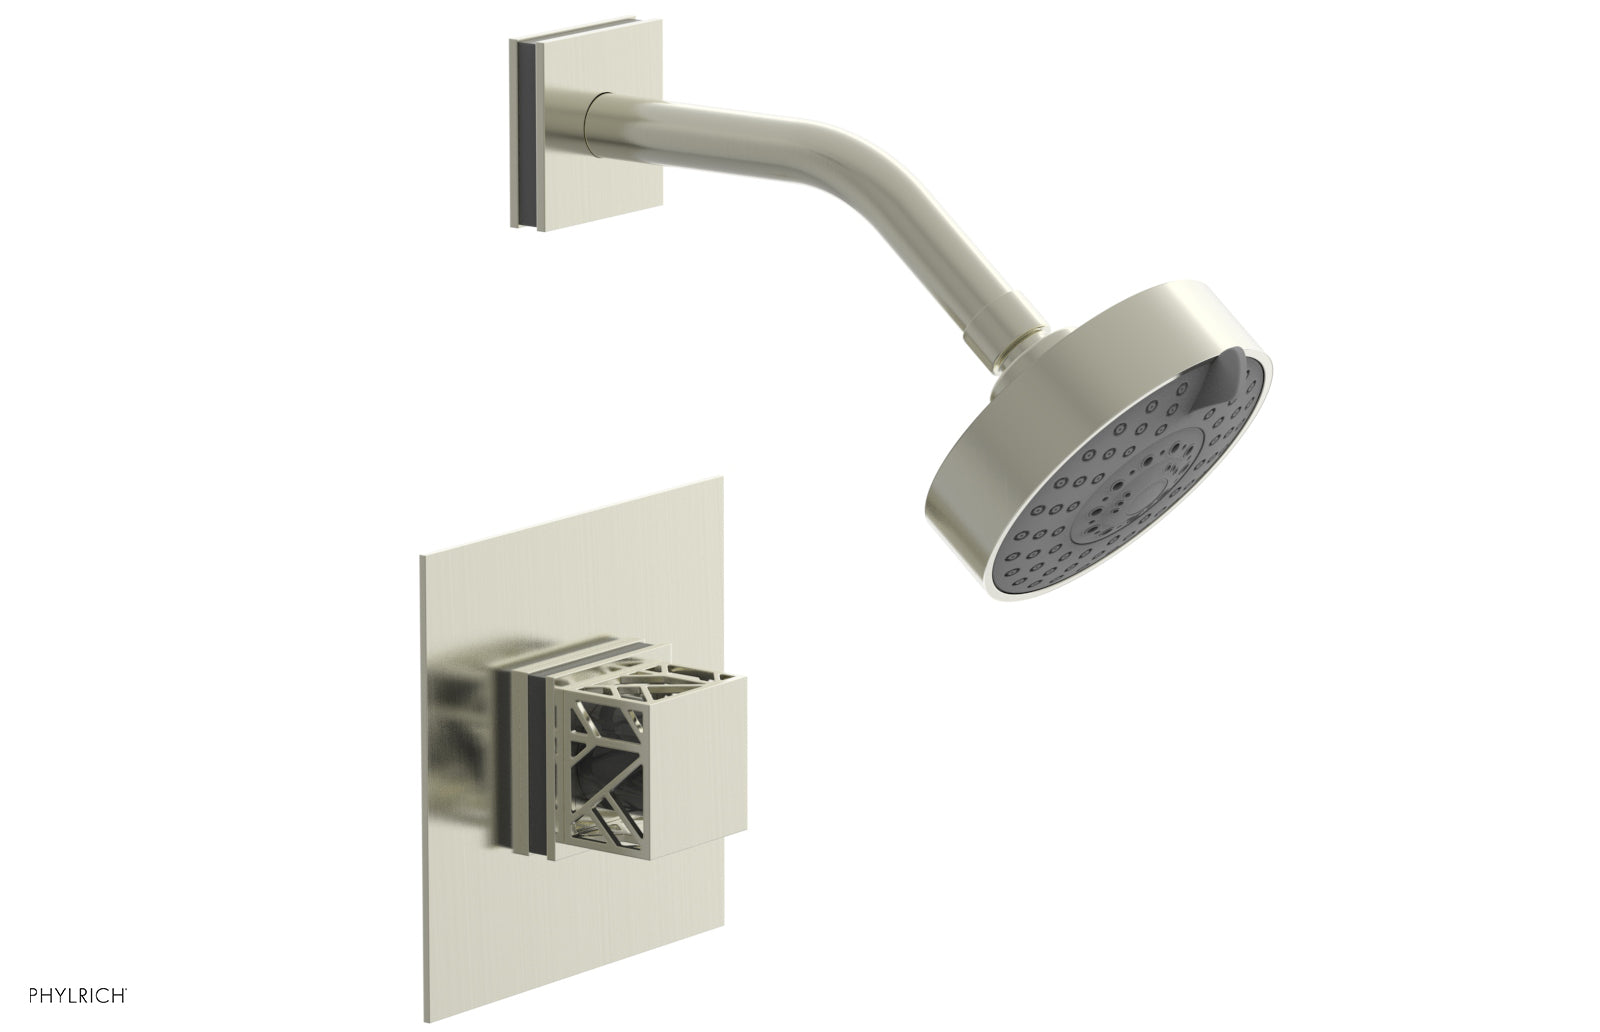 Phylrich JOLIE Pressure Balance Shower Set - Square Handle with "Grey" Accents